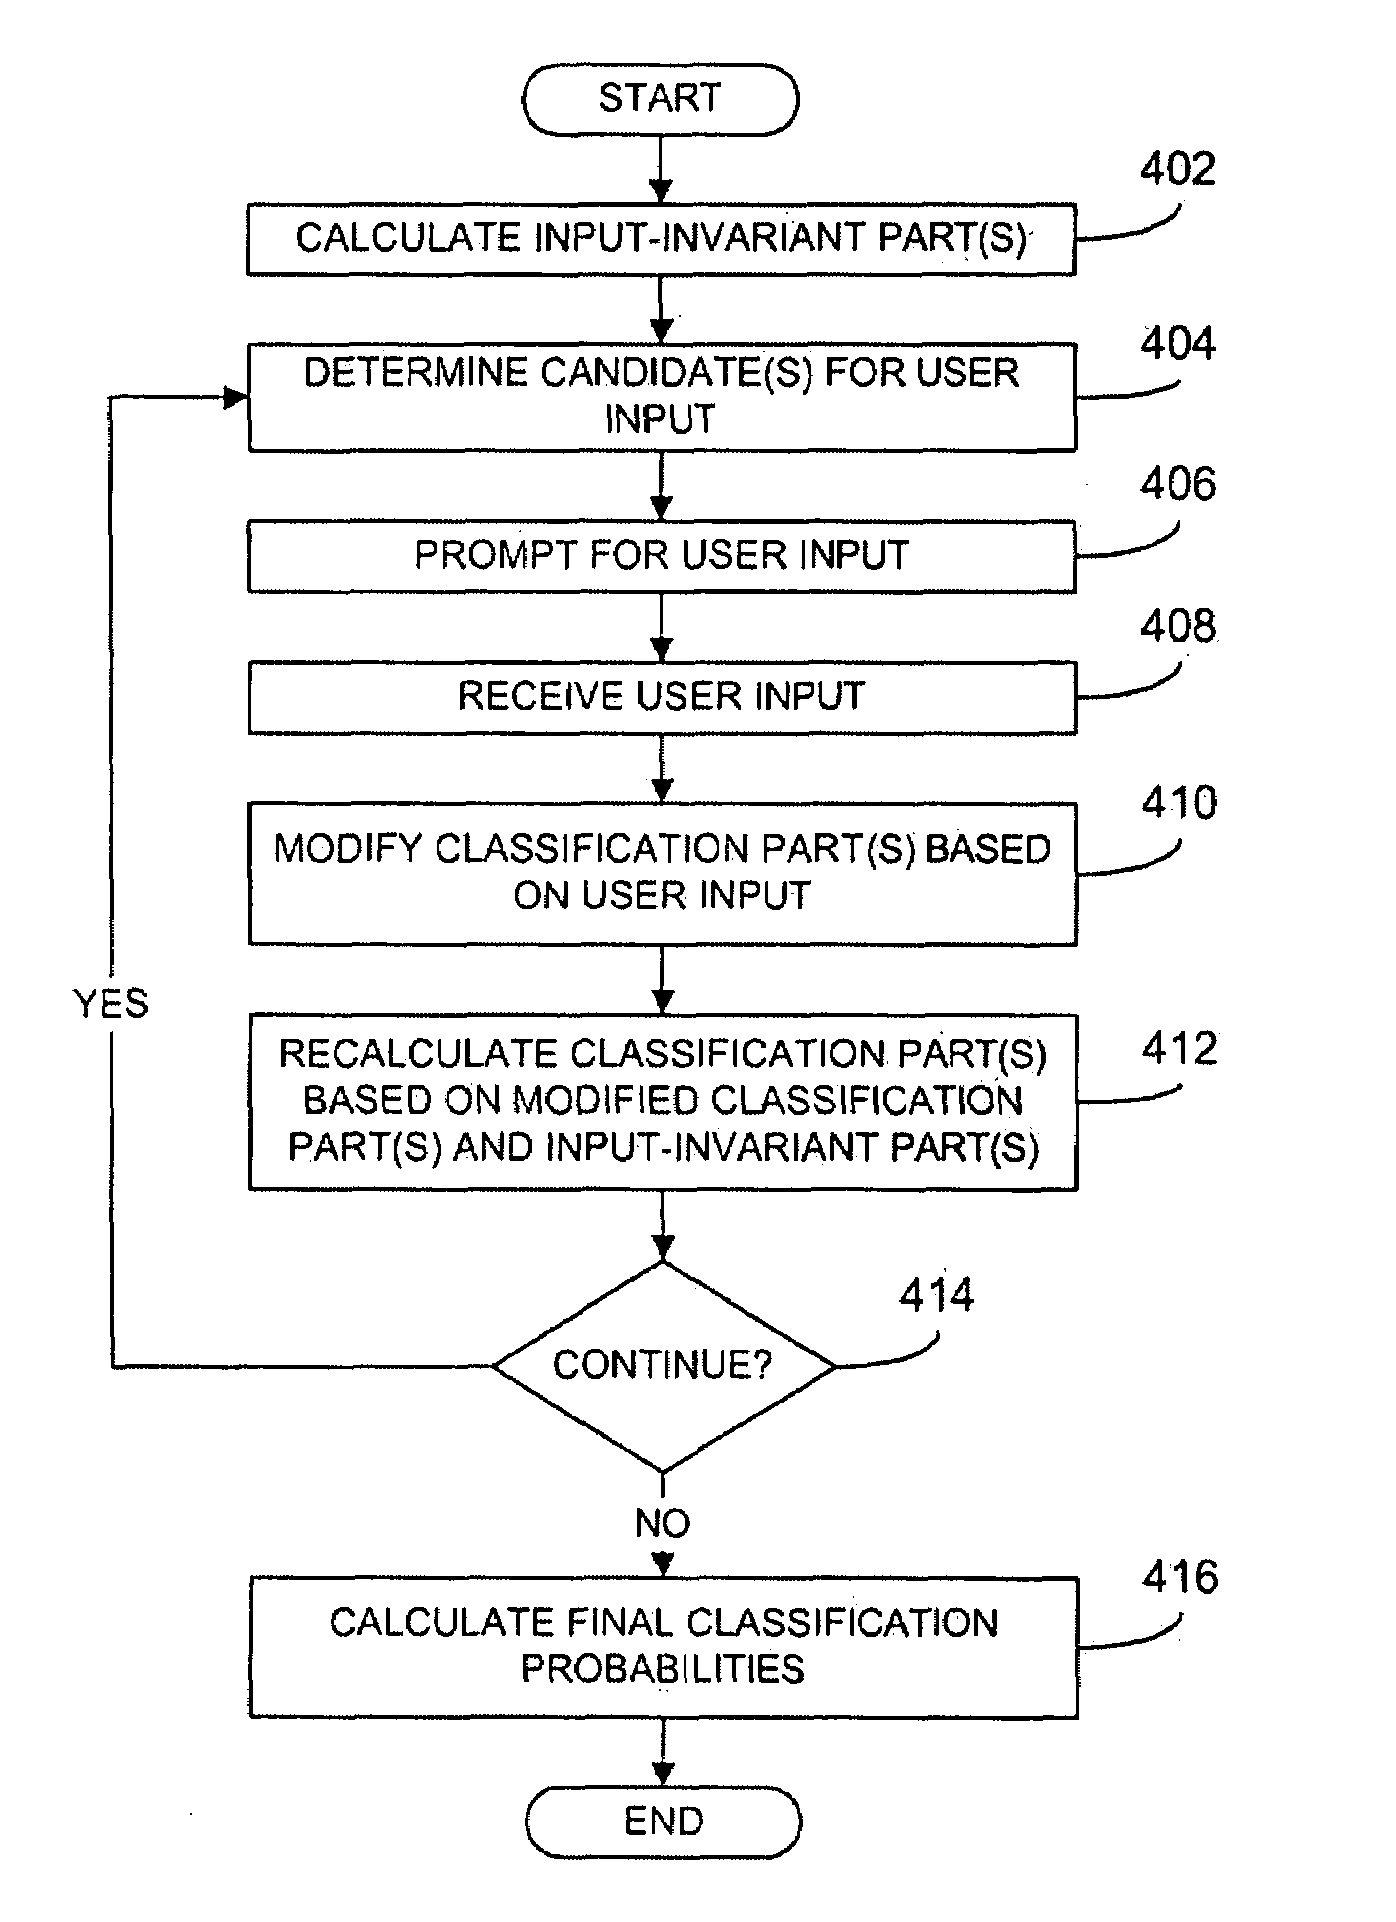 Automated classification algorithm comprising at least one input-invariant part